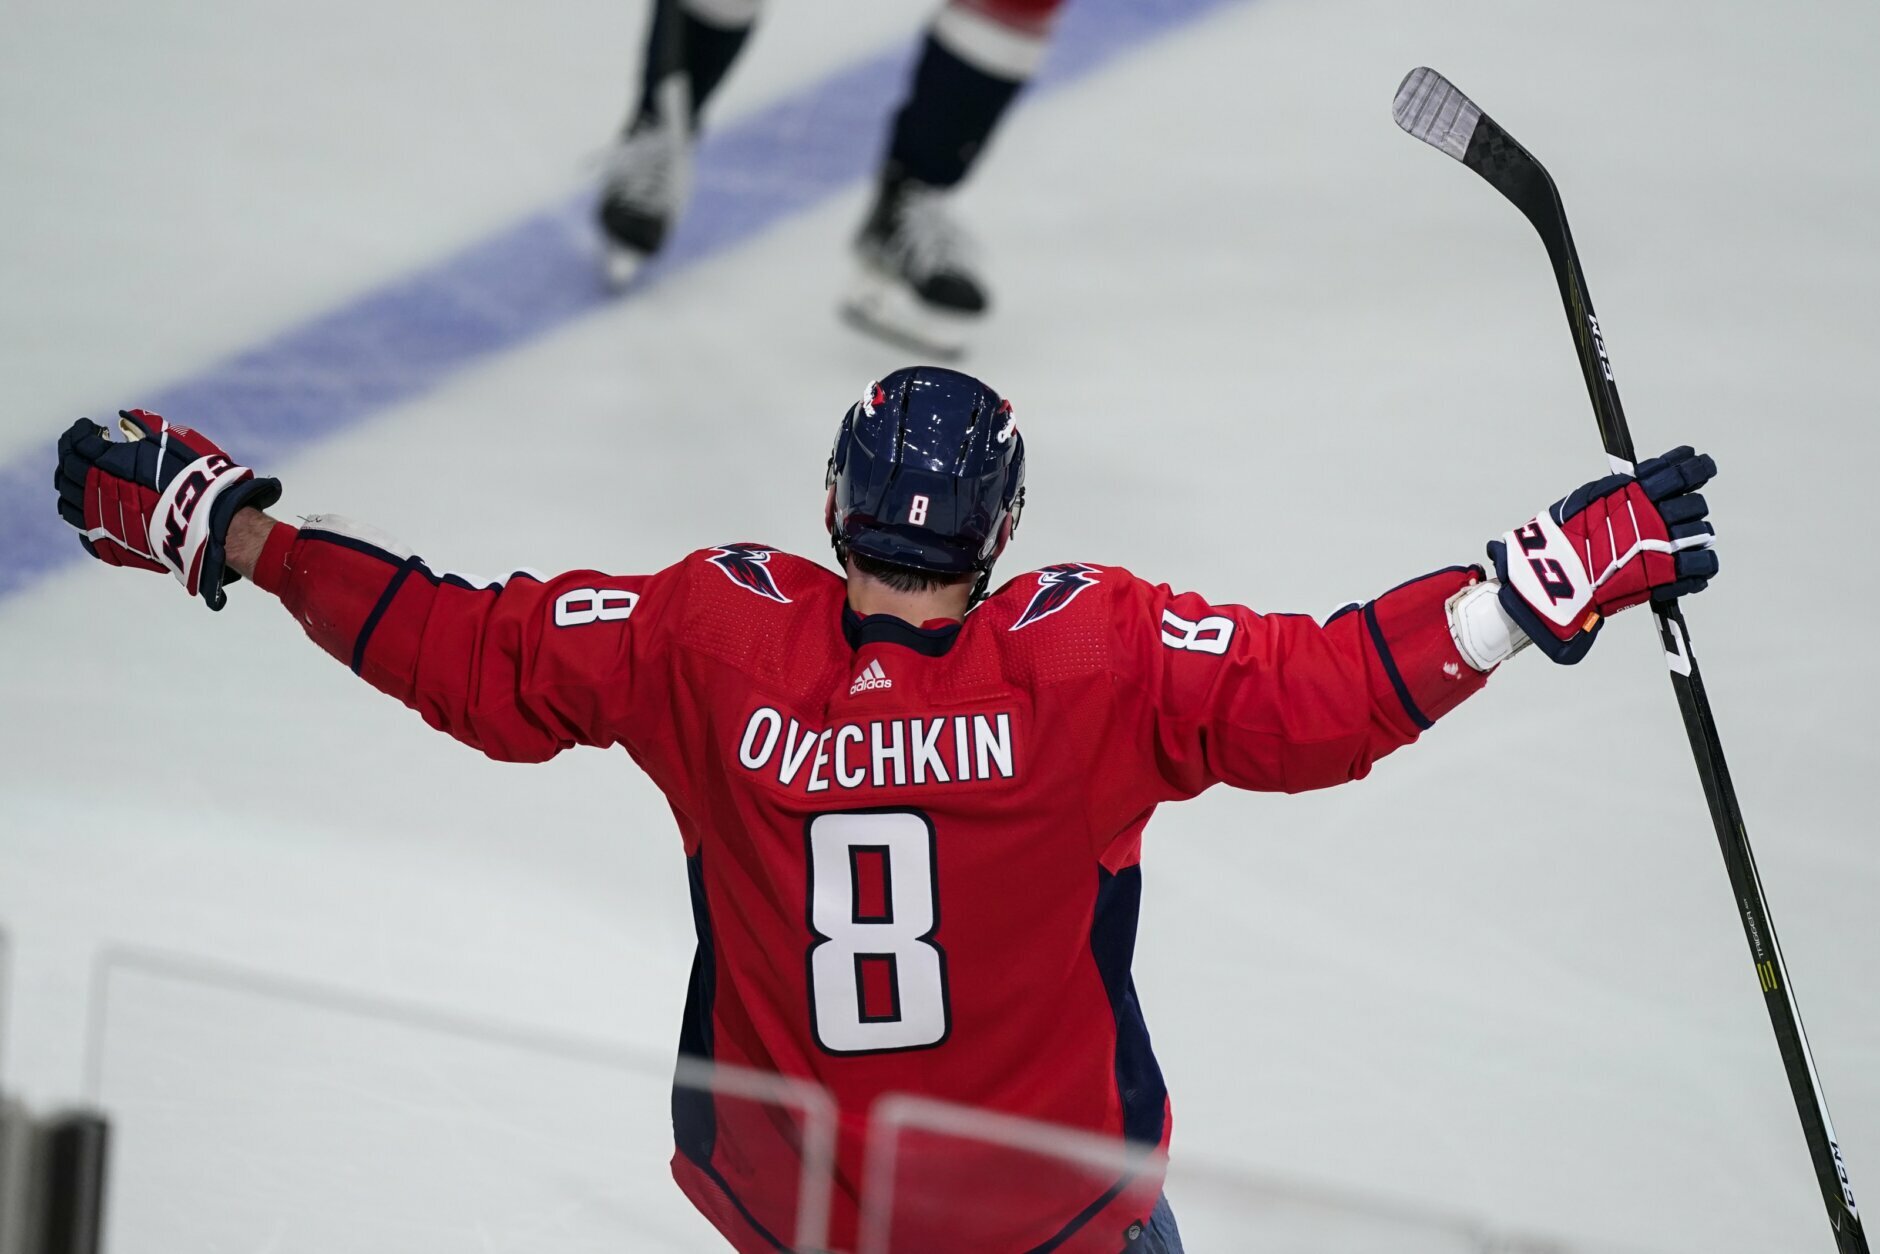 Alex Ovechkin is The Man again with the Washington Capitals